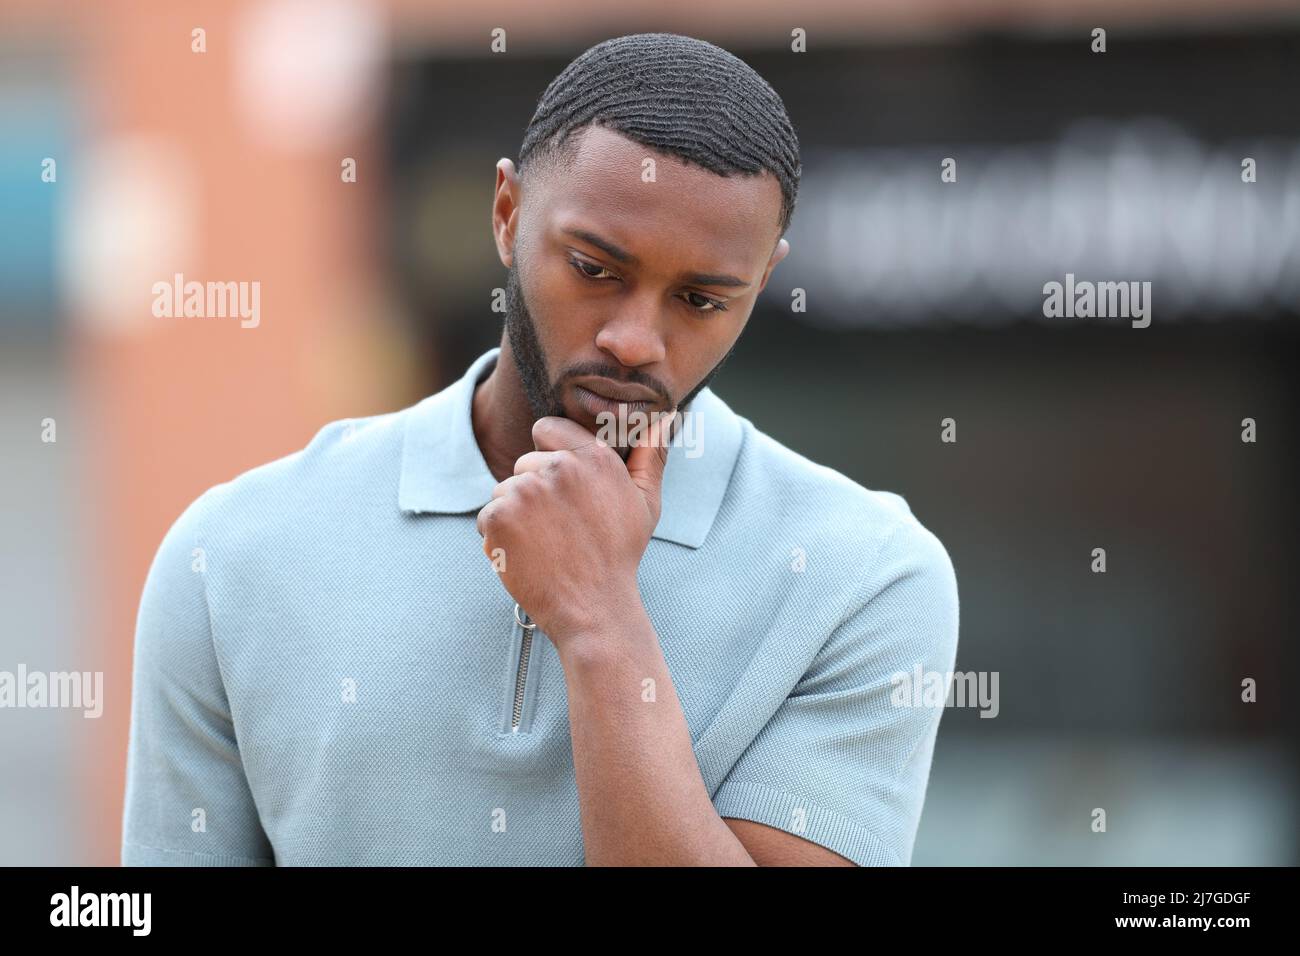 Front view portrait of a pensive man with black skin walking alone in the street Stock Photo